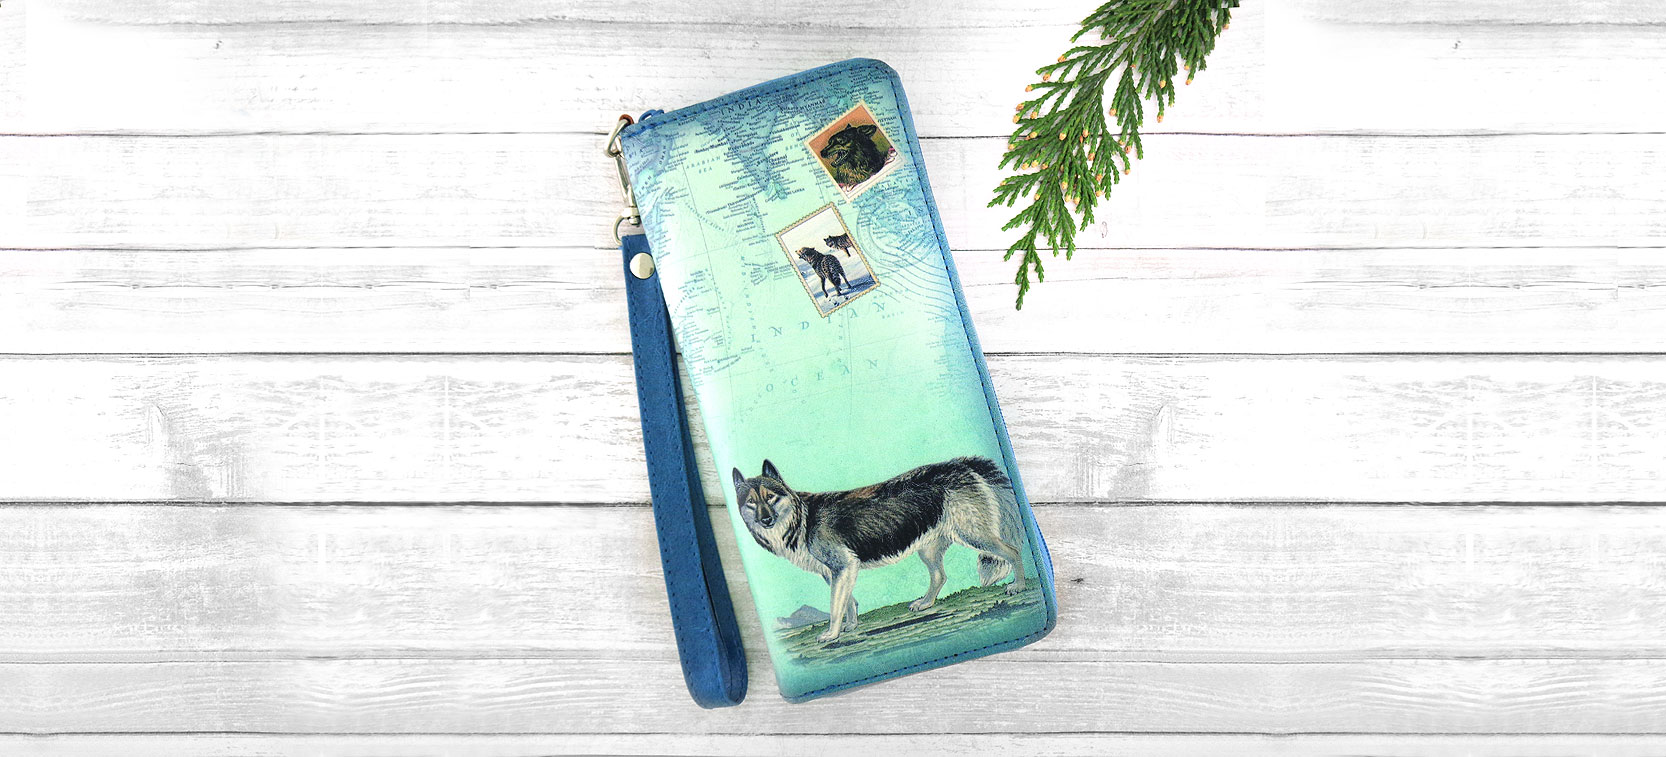 LAVISHY design and wholesale wolf themed vegan accessories and gfits to gift shops, boutiques and book shops, souvenir stores in Canada, USA and worldwide.